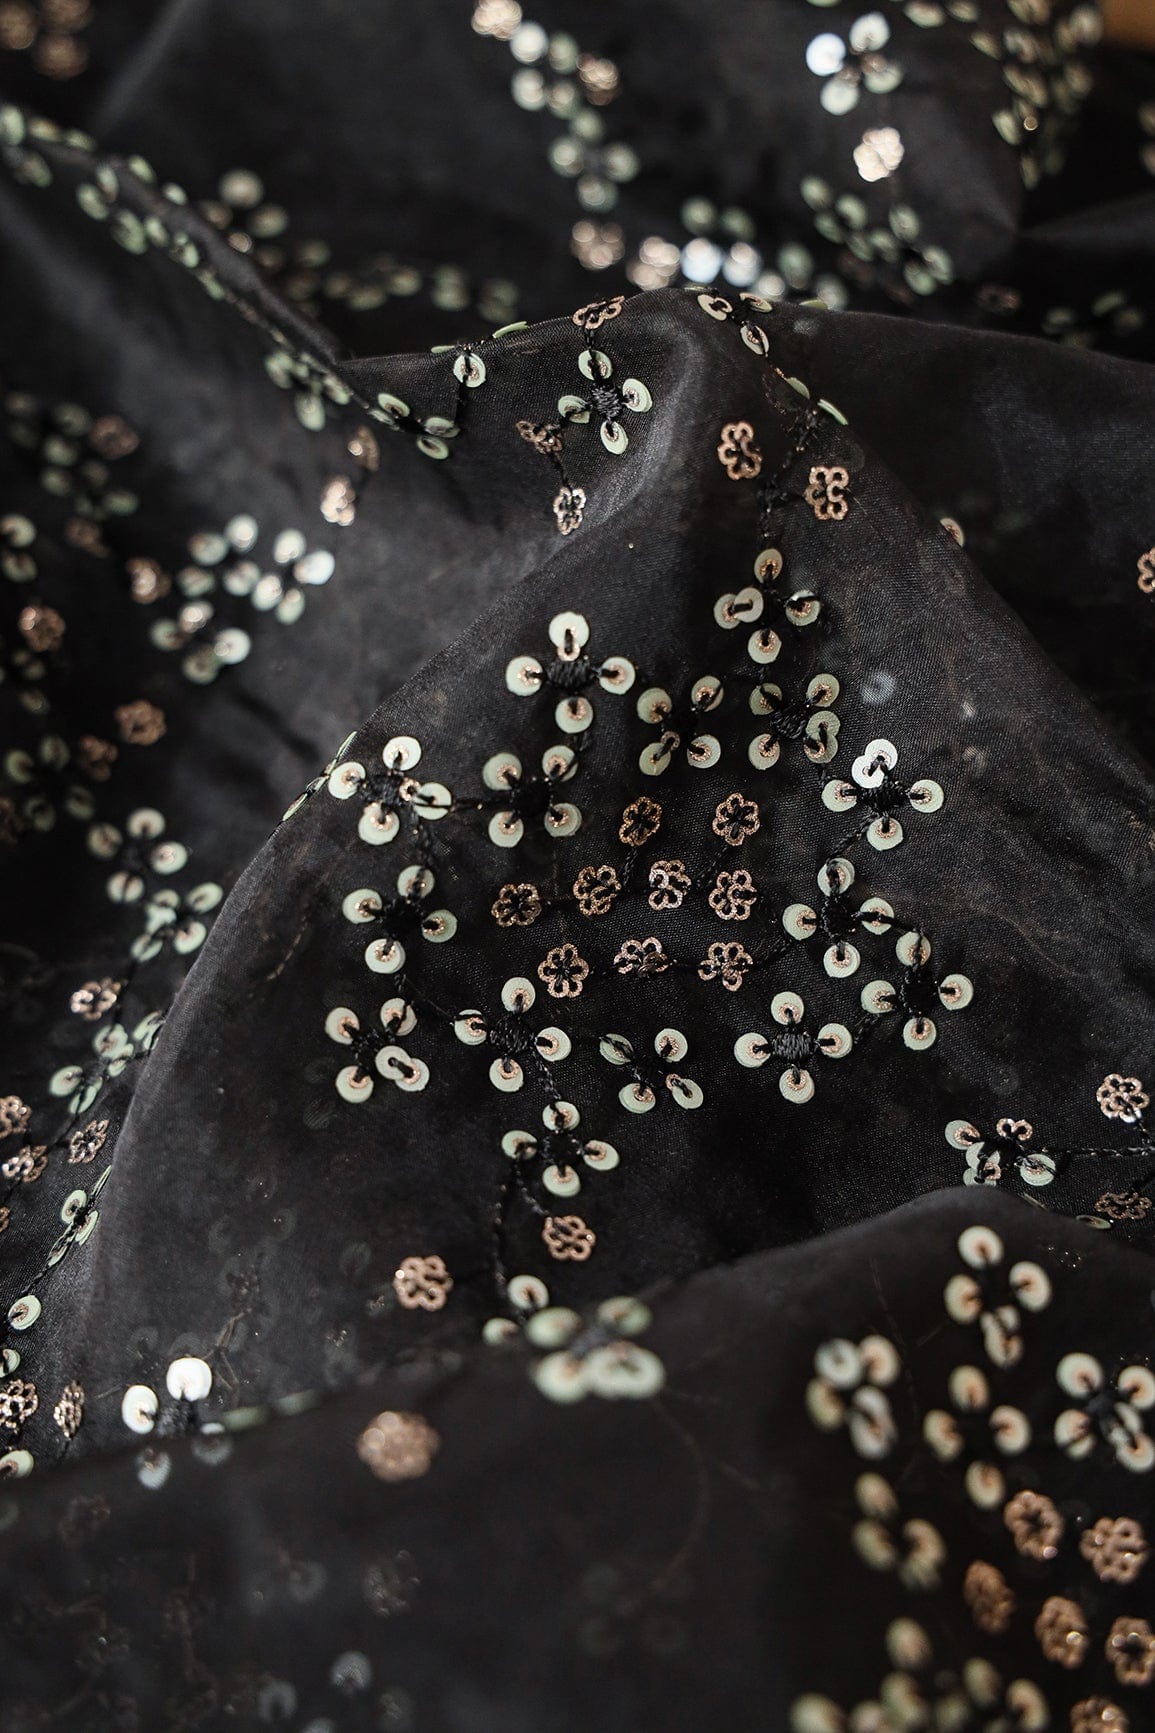 doeraa Embroidery Fabrics 4.25 Meter Cut Piece Of Gold And Silver Sequins Embroidery On Black Organza Fabric